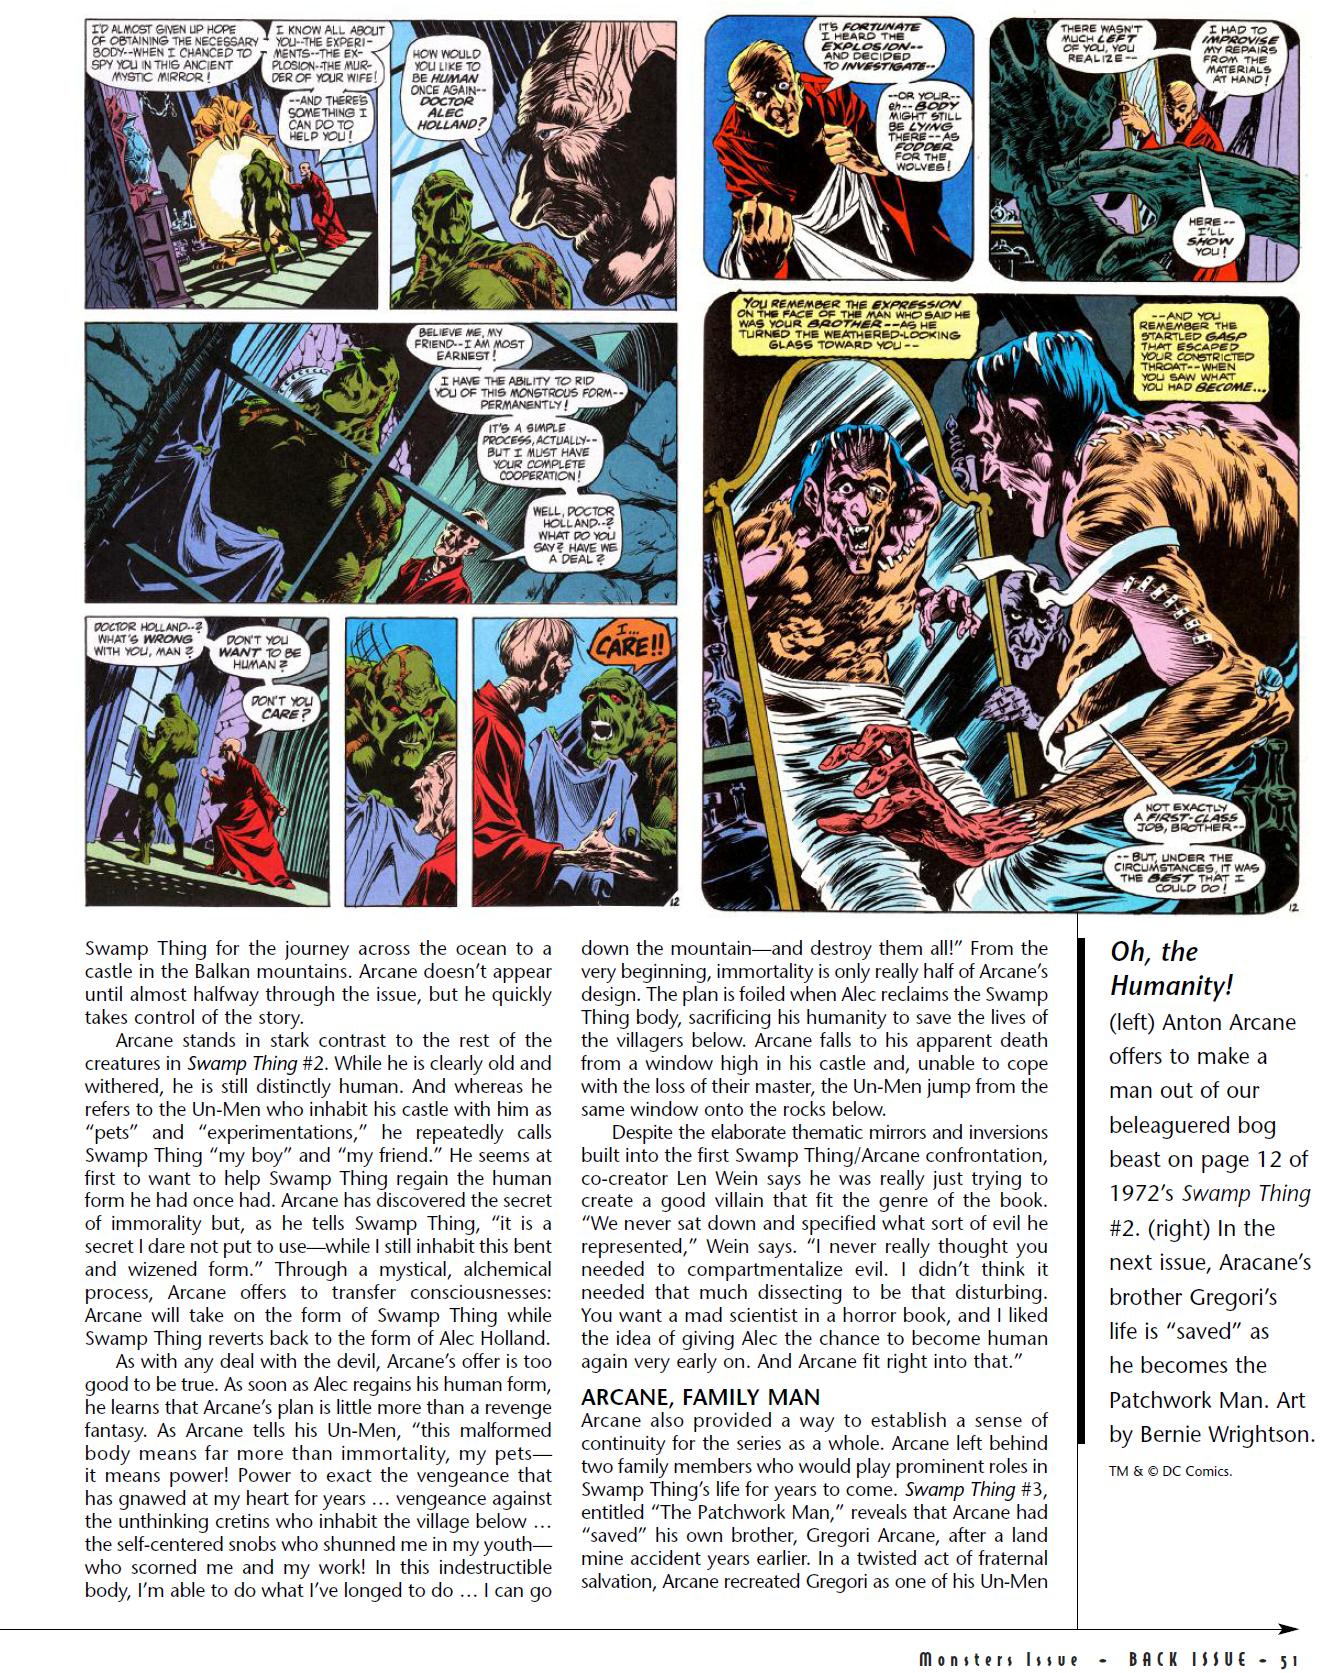 Read online Back Issue comic -  Issue #36 - 53